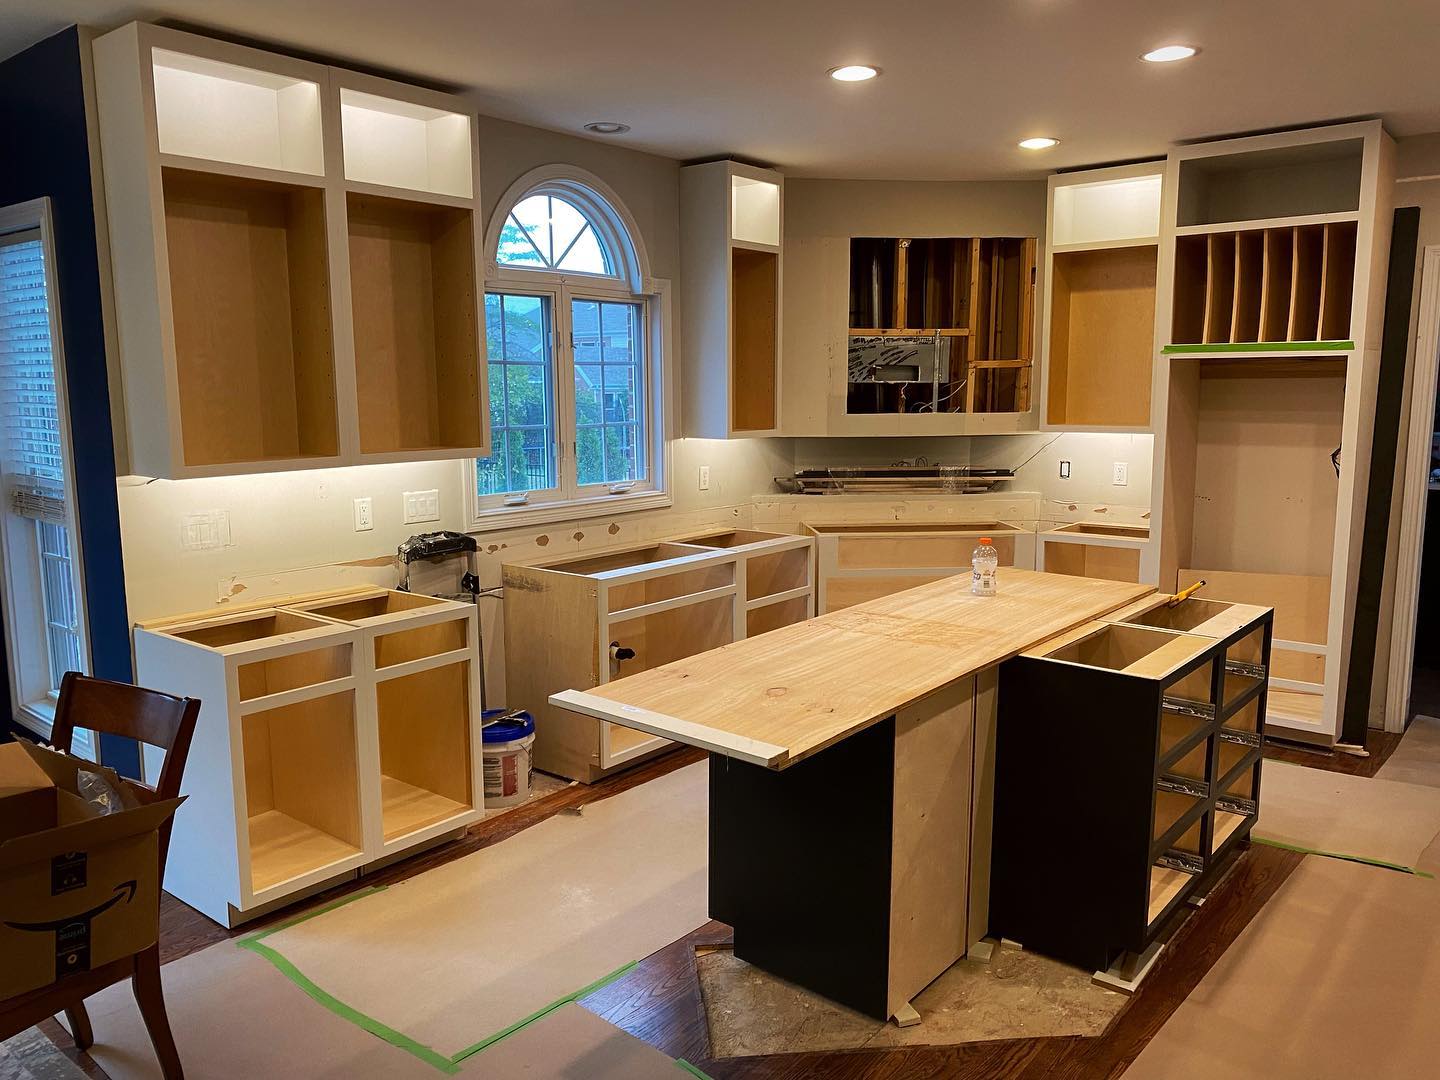 A kitchen under renovation with cabinets partially installed, unfinished center island, and protective coverings on the floor. Some appliances and fixtures are not yet installed.